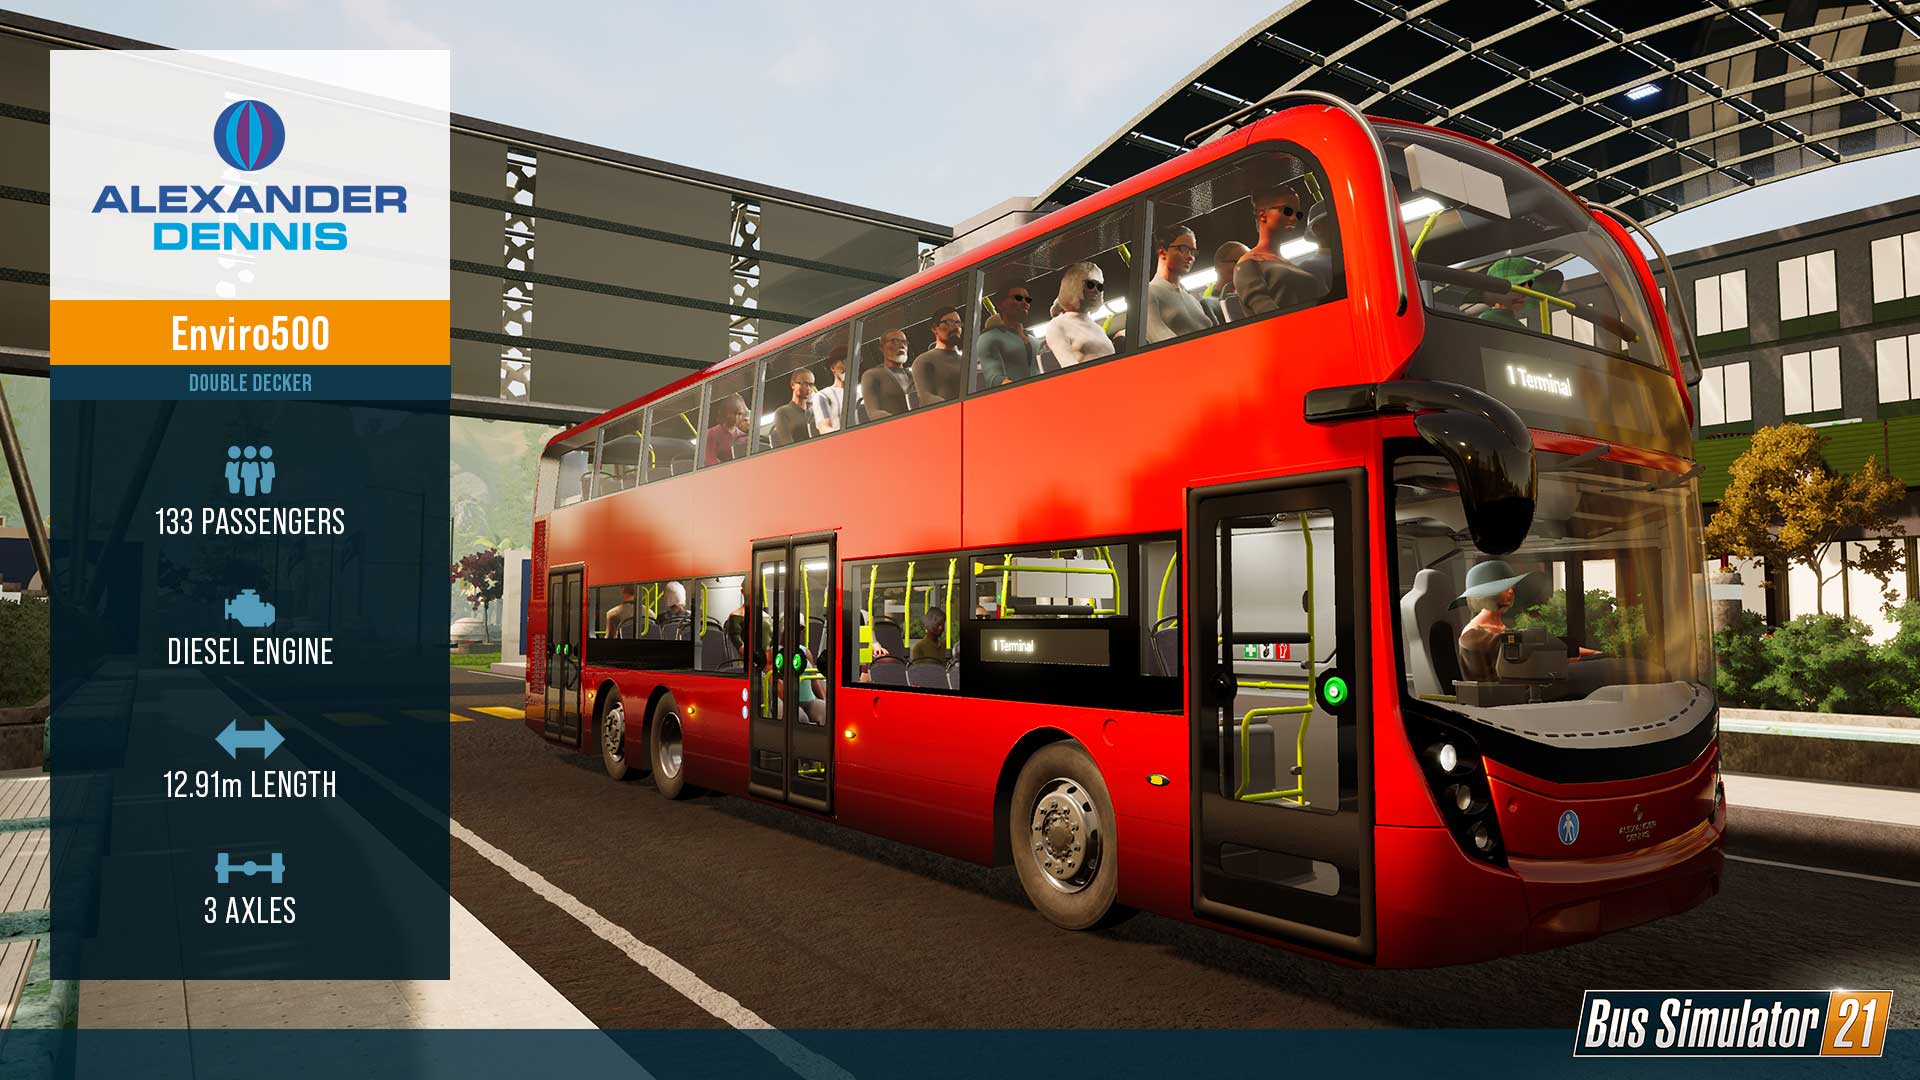 Bus Simulator Review - Fare Play (PS4) - PlayStation LifeStyle